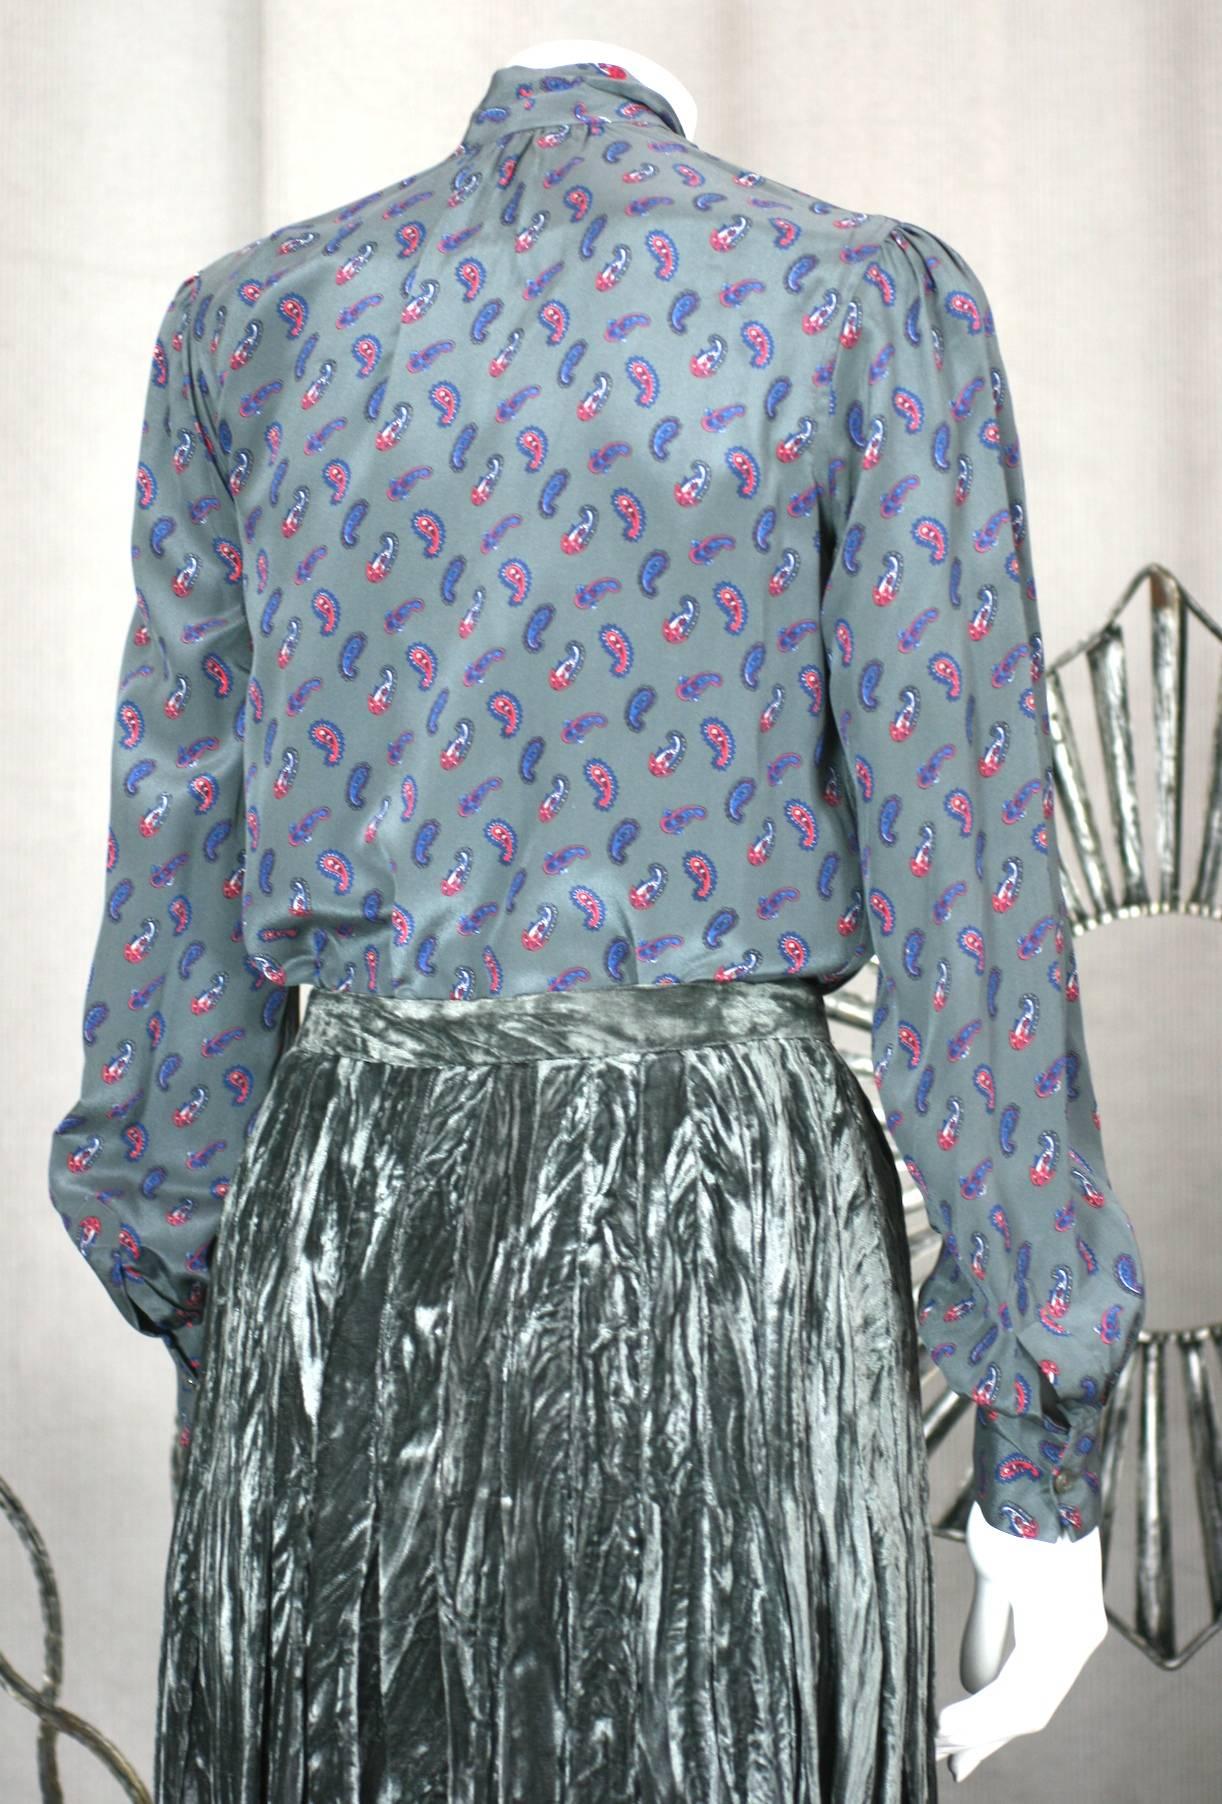 Yves Saint Laurent Silk Crepe Paisley Blouse In Excellent Condition For Sale In New York, NY